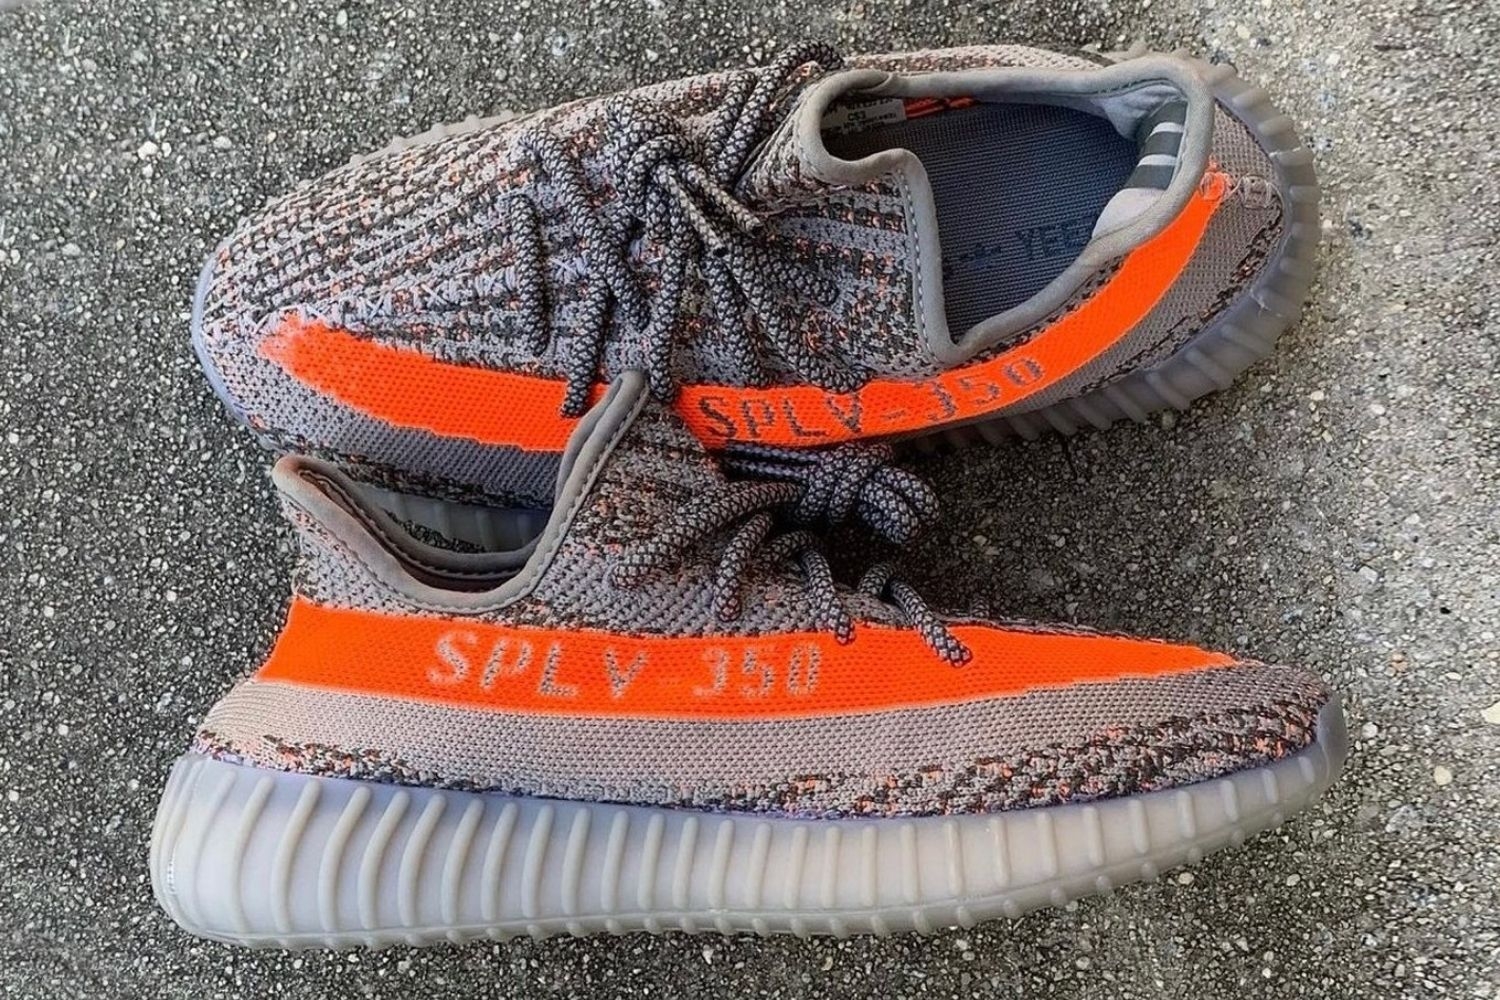 adidas Yeezy Boost 350 V2 comes with Beluga colorway